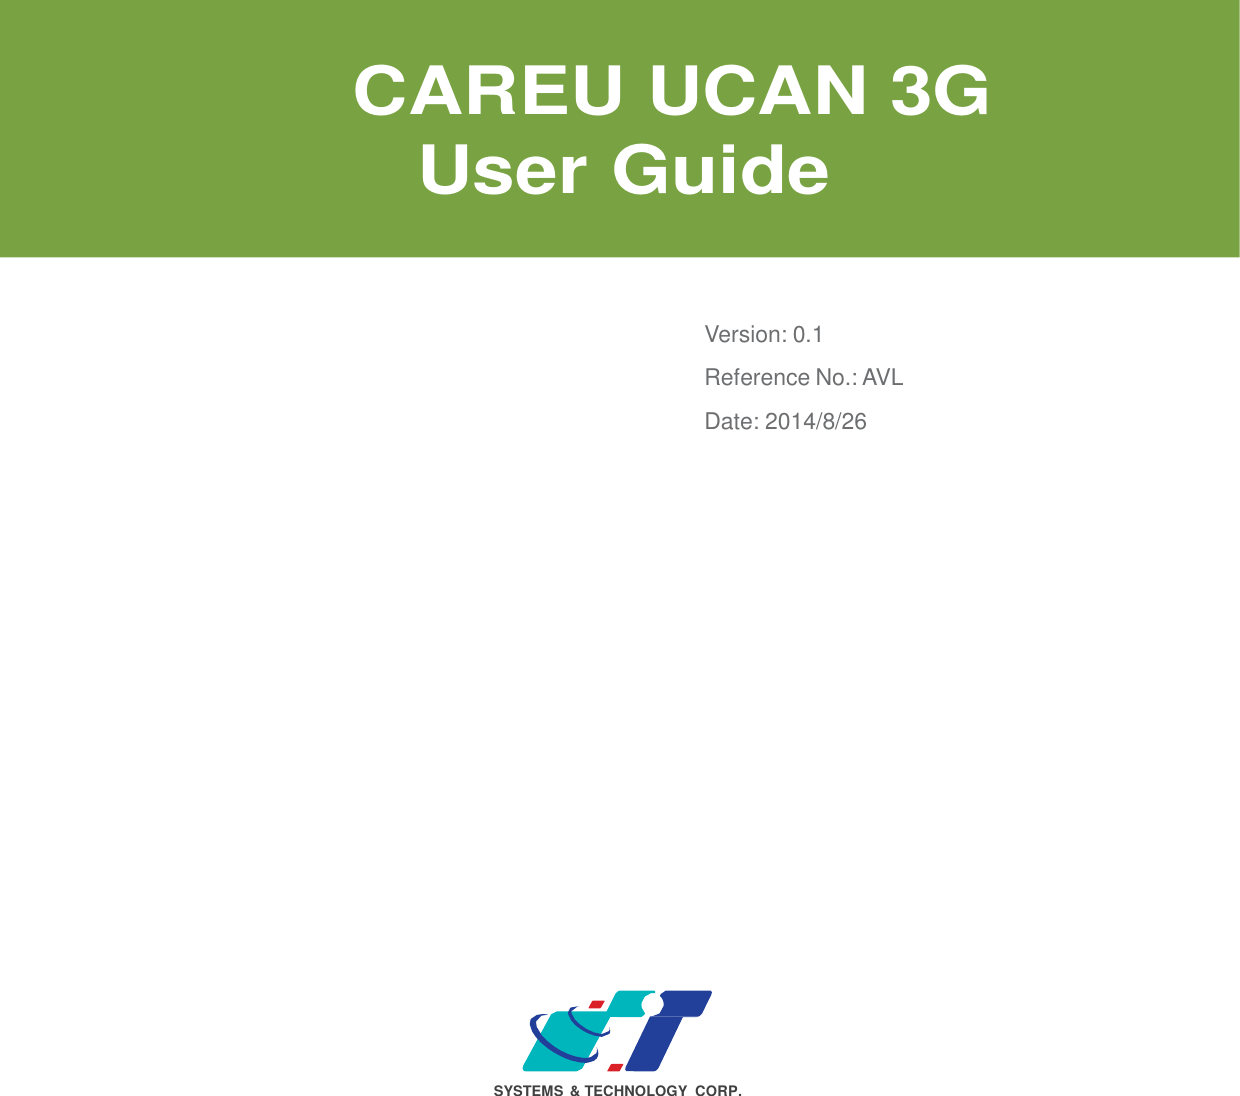                      CAREU UCAN 3G  User Guide      Version: 0.1  Reference No.: AVL Date: 2014/8/26                               SYSTEMS  &amp; TECHNOLOGY  CORP. 